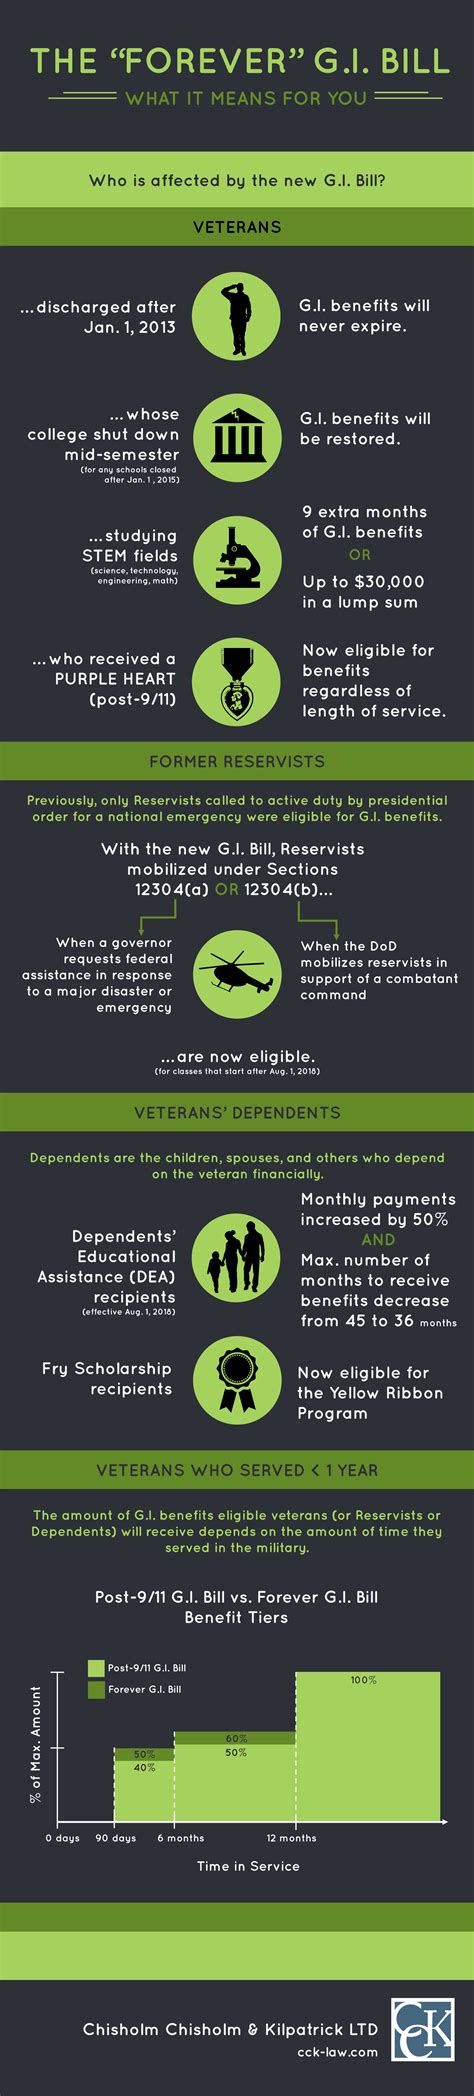 how to use post 9/11 gi bill for dependents